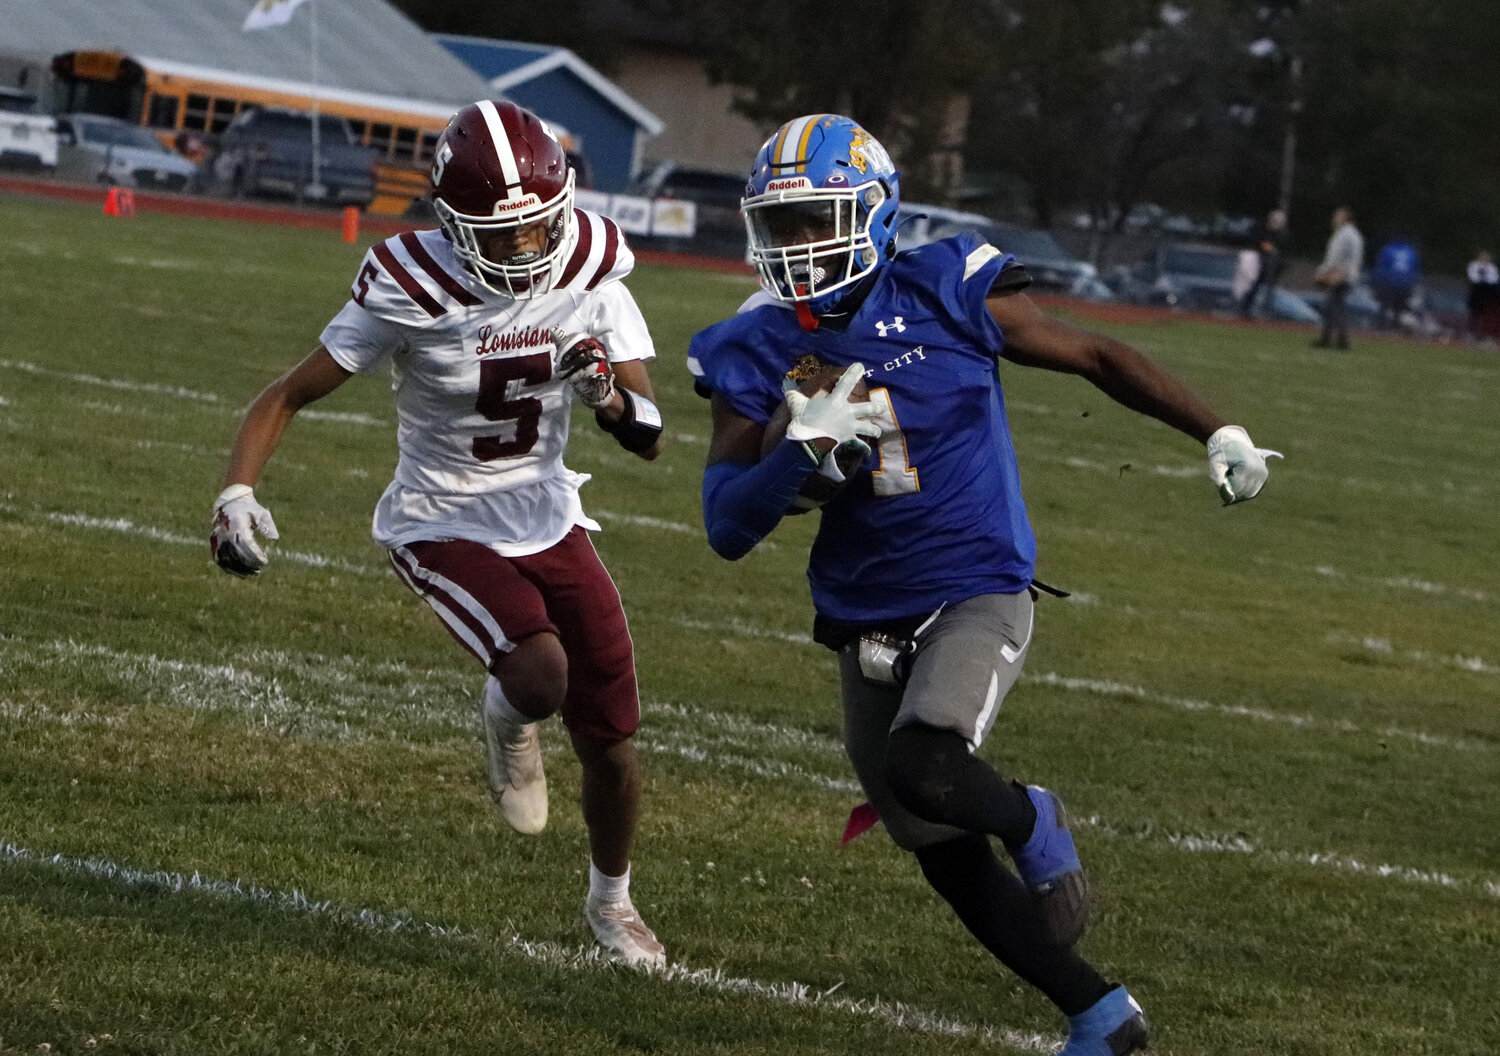 Kayden Allison (right) runs towards the end zone during a game against Louisiana this past season. Allison was named to the EMO first team at wide receiver.